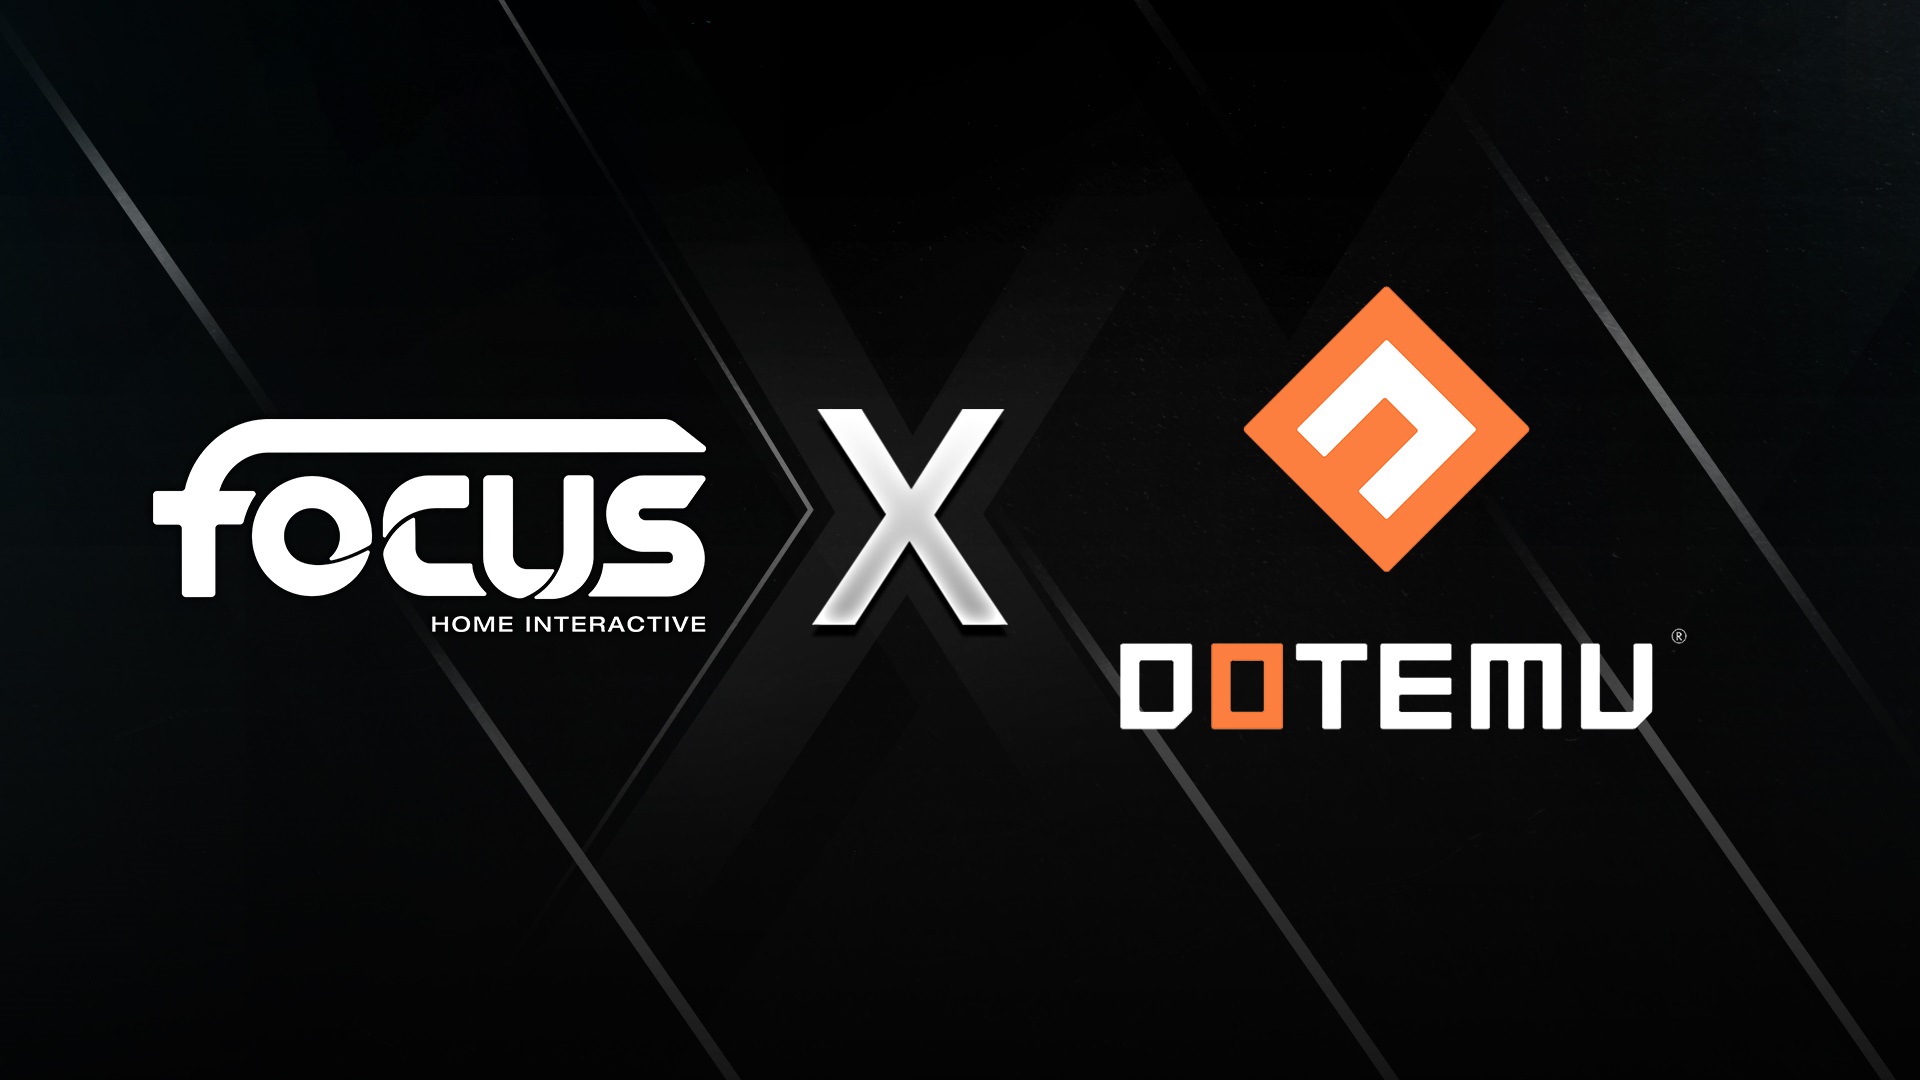 Focus Home Interactive has Acquired Dotemu